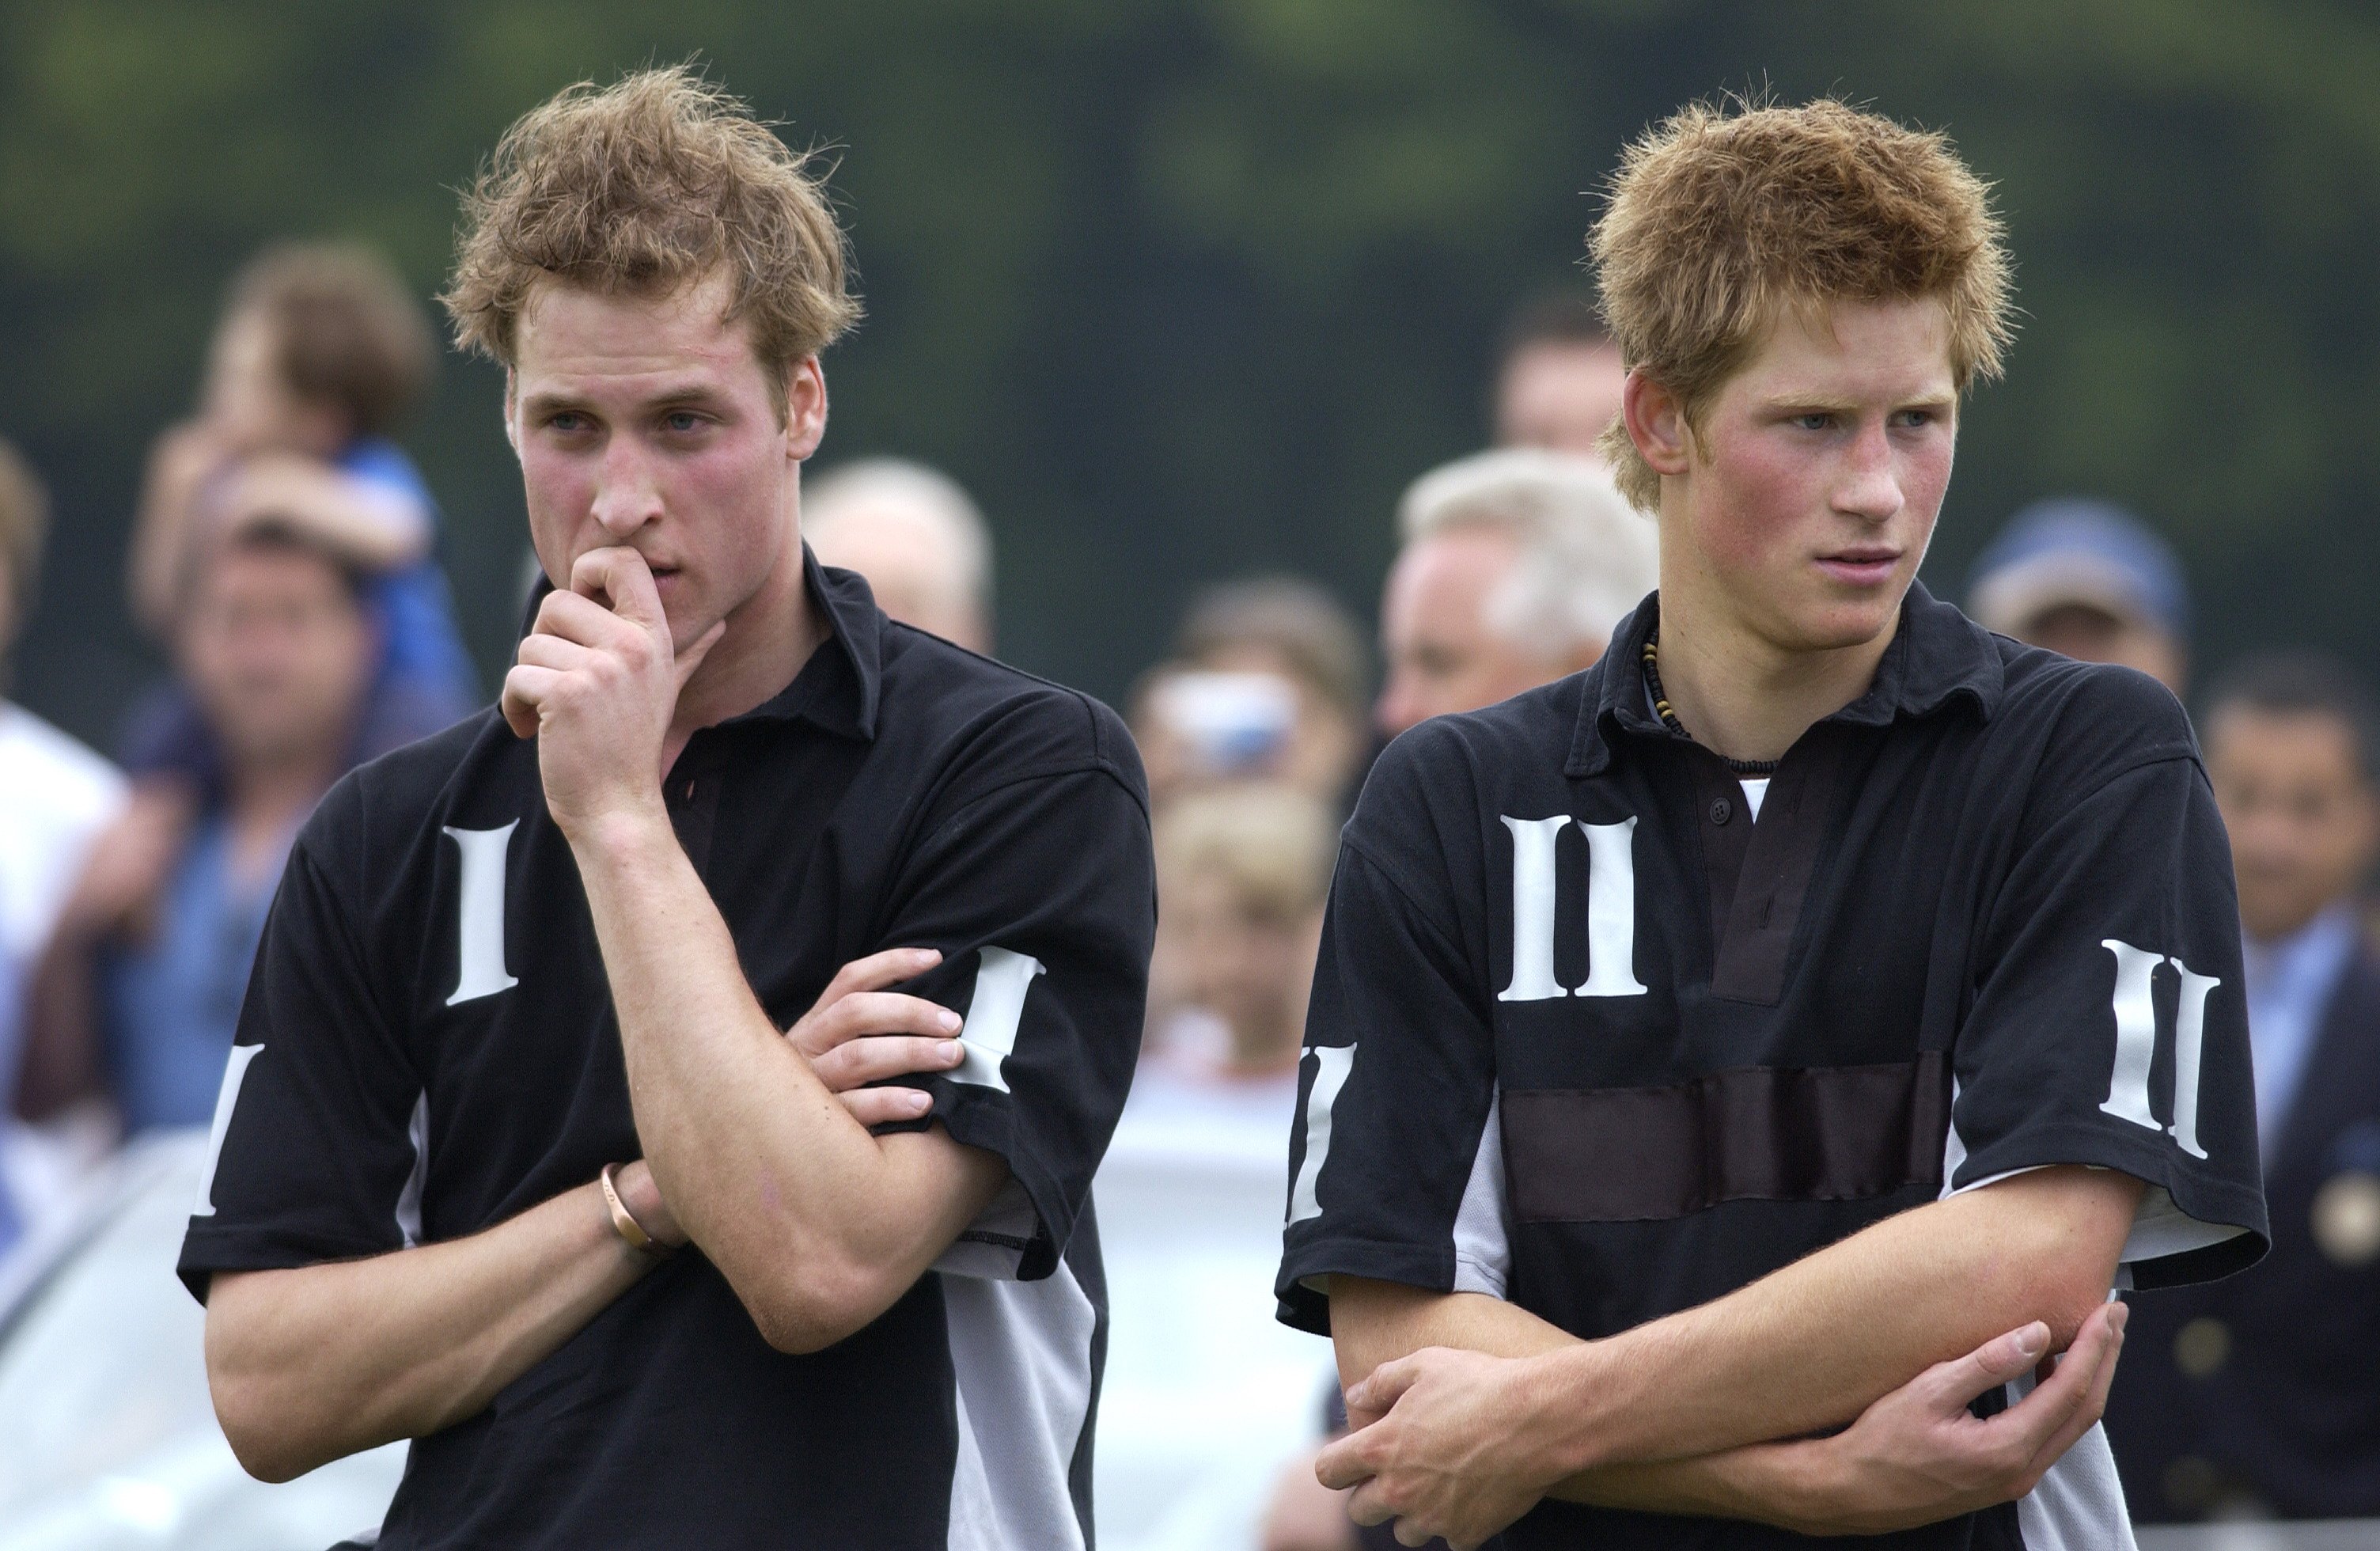 Prince William and Prince Harry in deep in thought after playing for The Mercedes-amg Polo Team against The Beaufort Team At Beaufort Polo Club in Tetbury, England. / Source: Getty Images